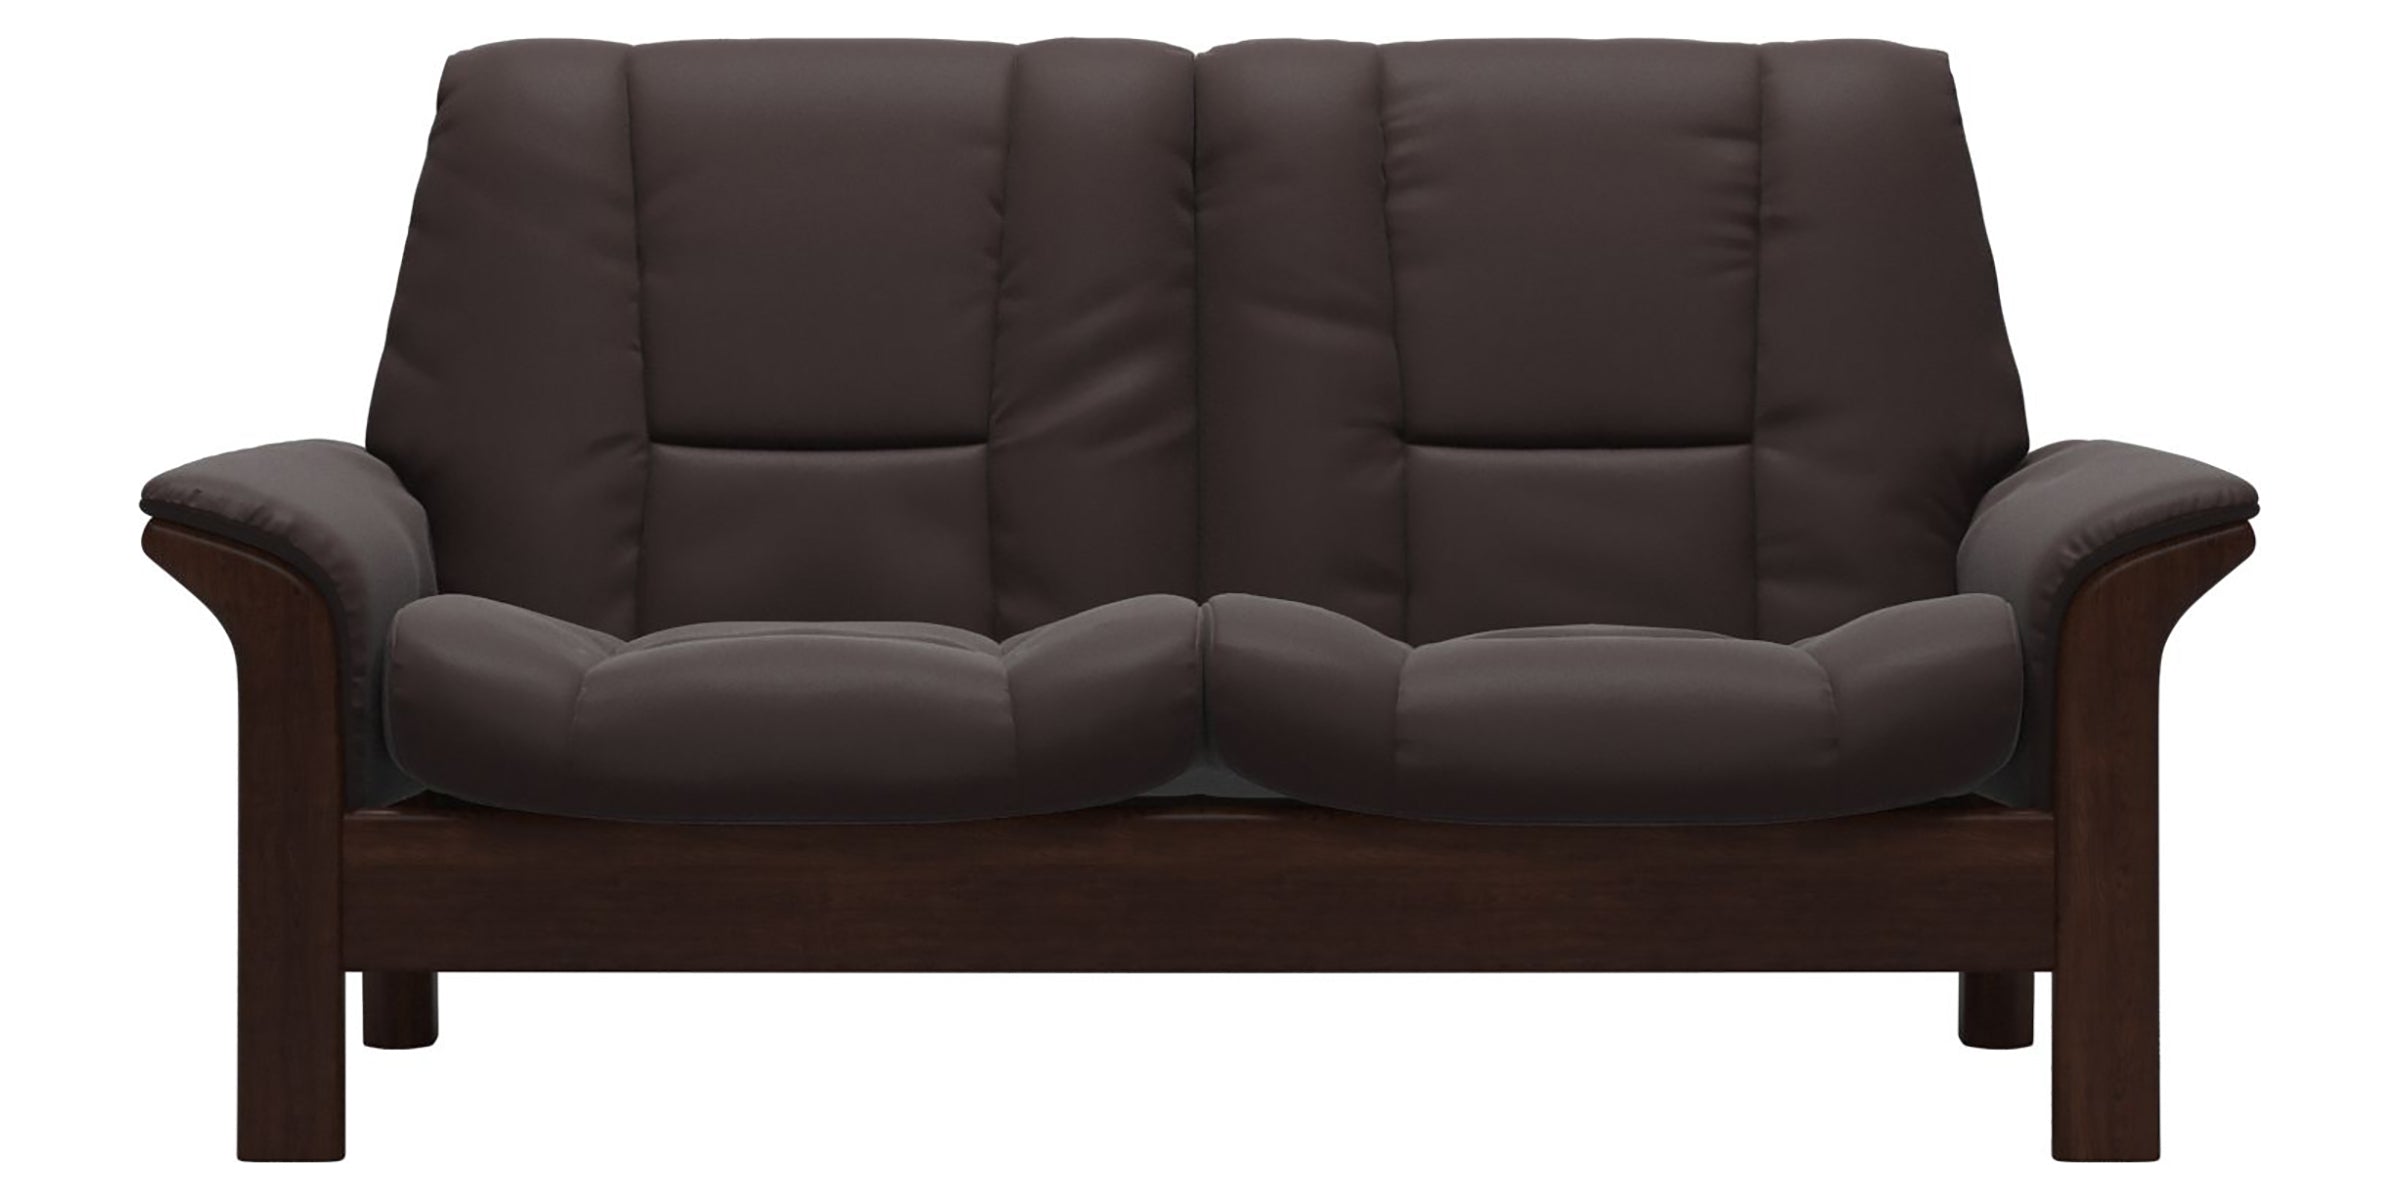 Paloma Leather Chocolate and Brown Base | Stressless Buckingham 2-Seater Low Back Sofa | Valley Ridge Furniture